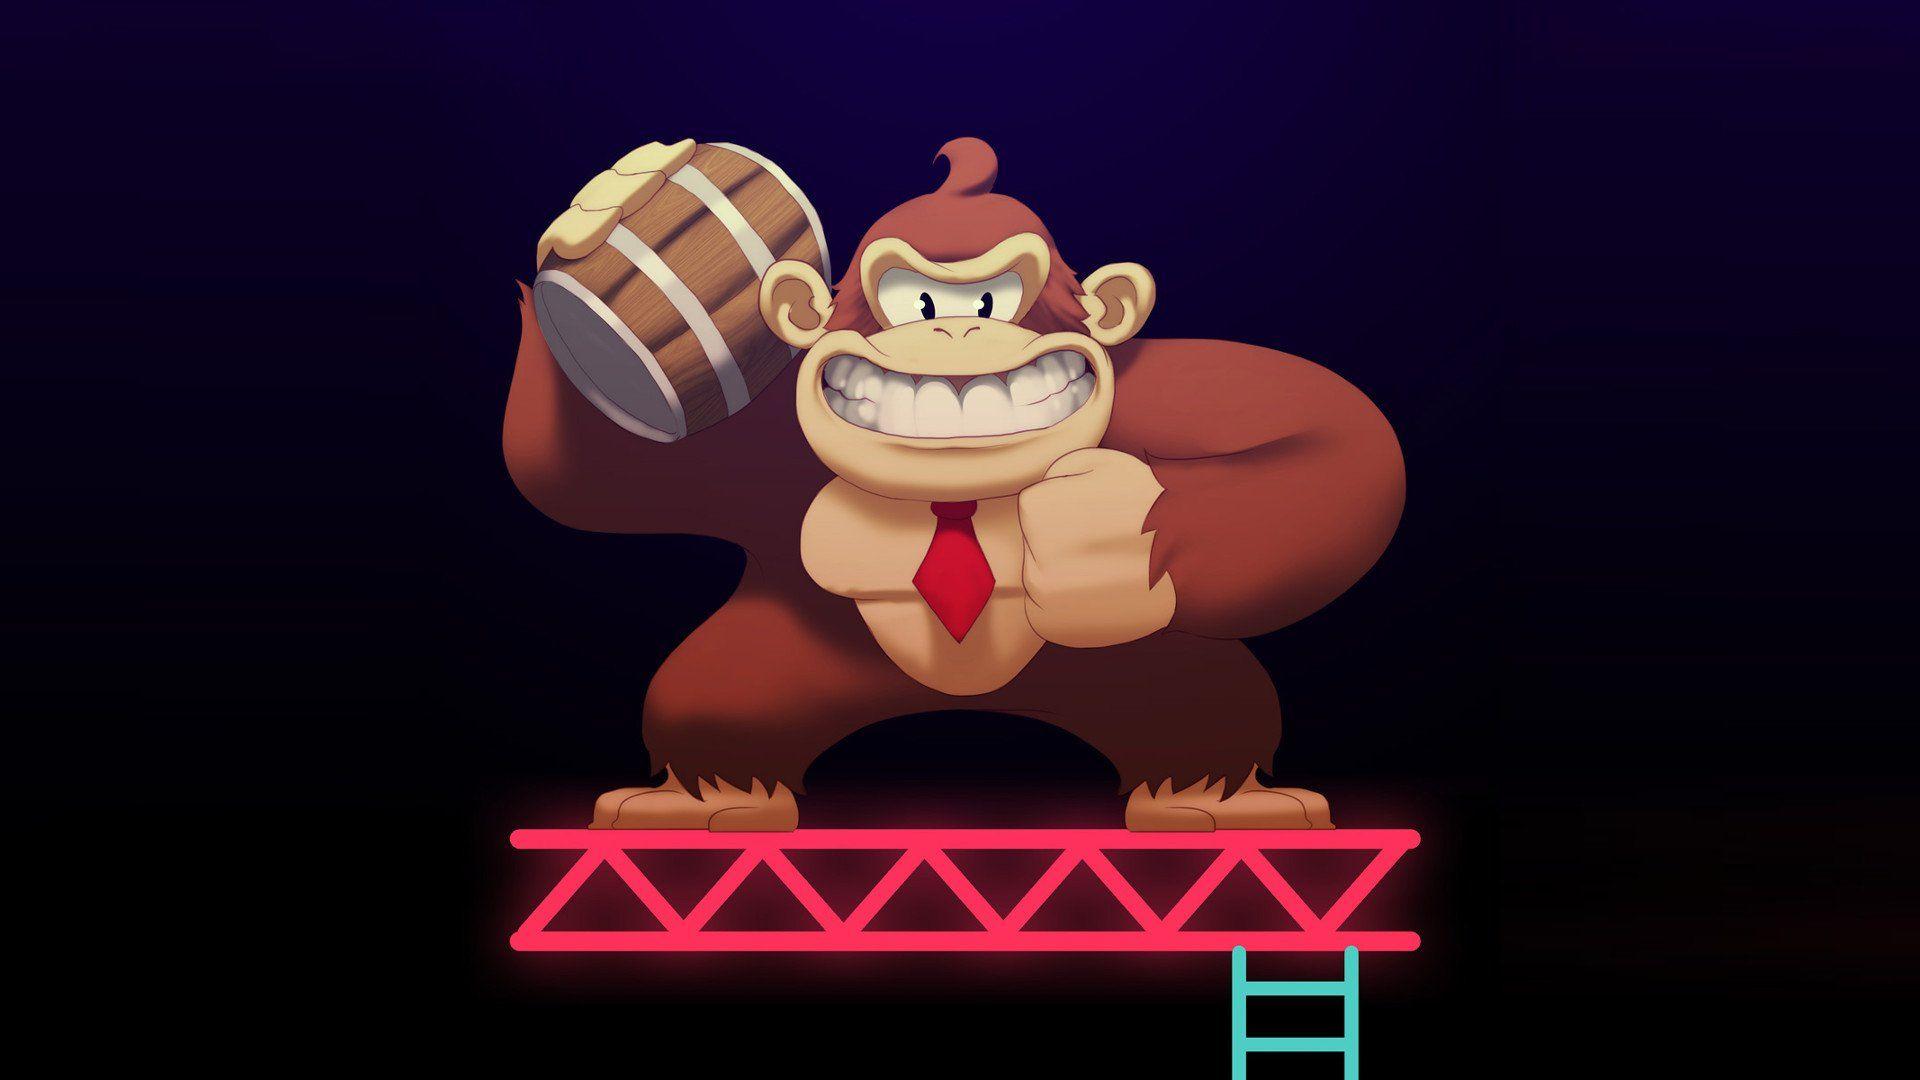 Donkey Kong Full HD Wallpaper and Background Imagex1080